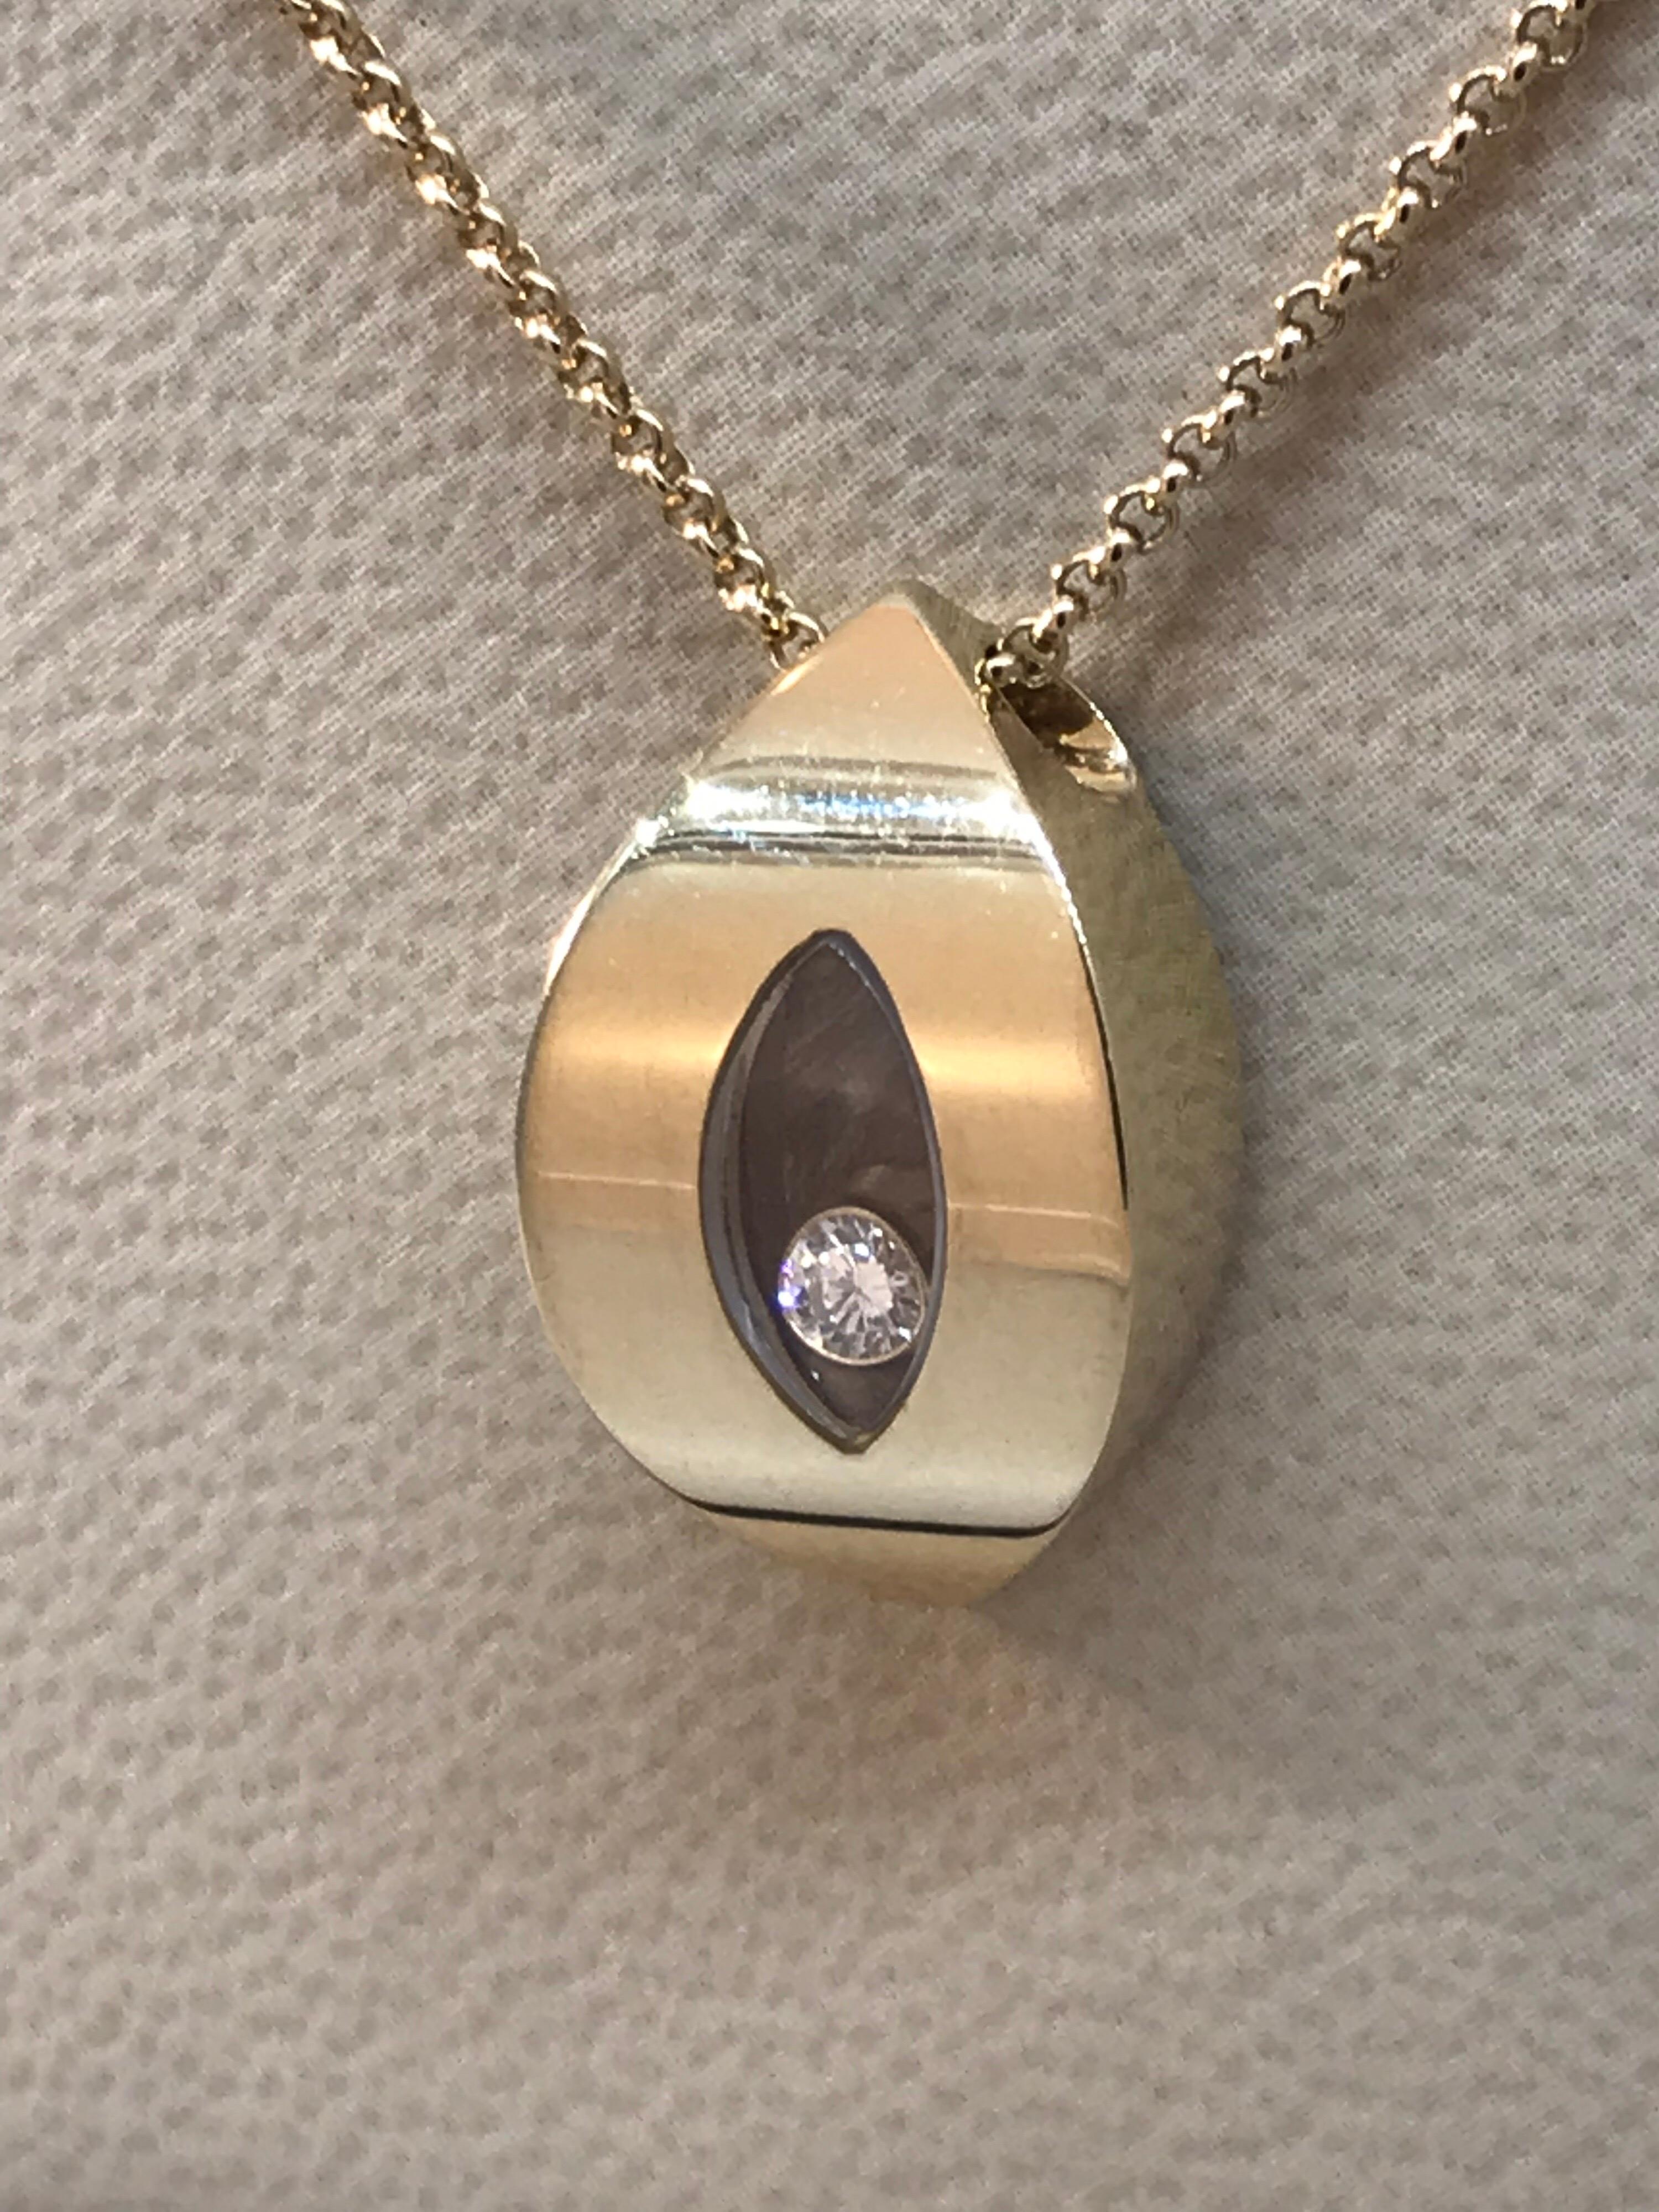 Chopard Happy Diamond Pendant Necklace

Model Number: 79/3747

100% Authentic

New / Old Stock

Comes with original Chopard box and jewels manual

18 Karat Yellow Gold

1 Floating Diamond

Retails for $3,350